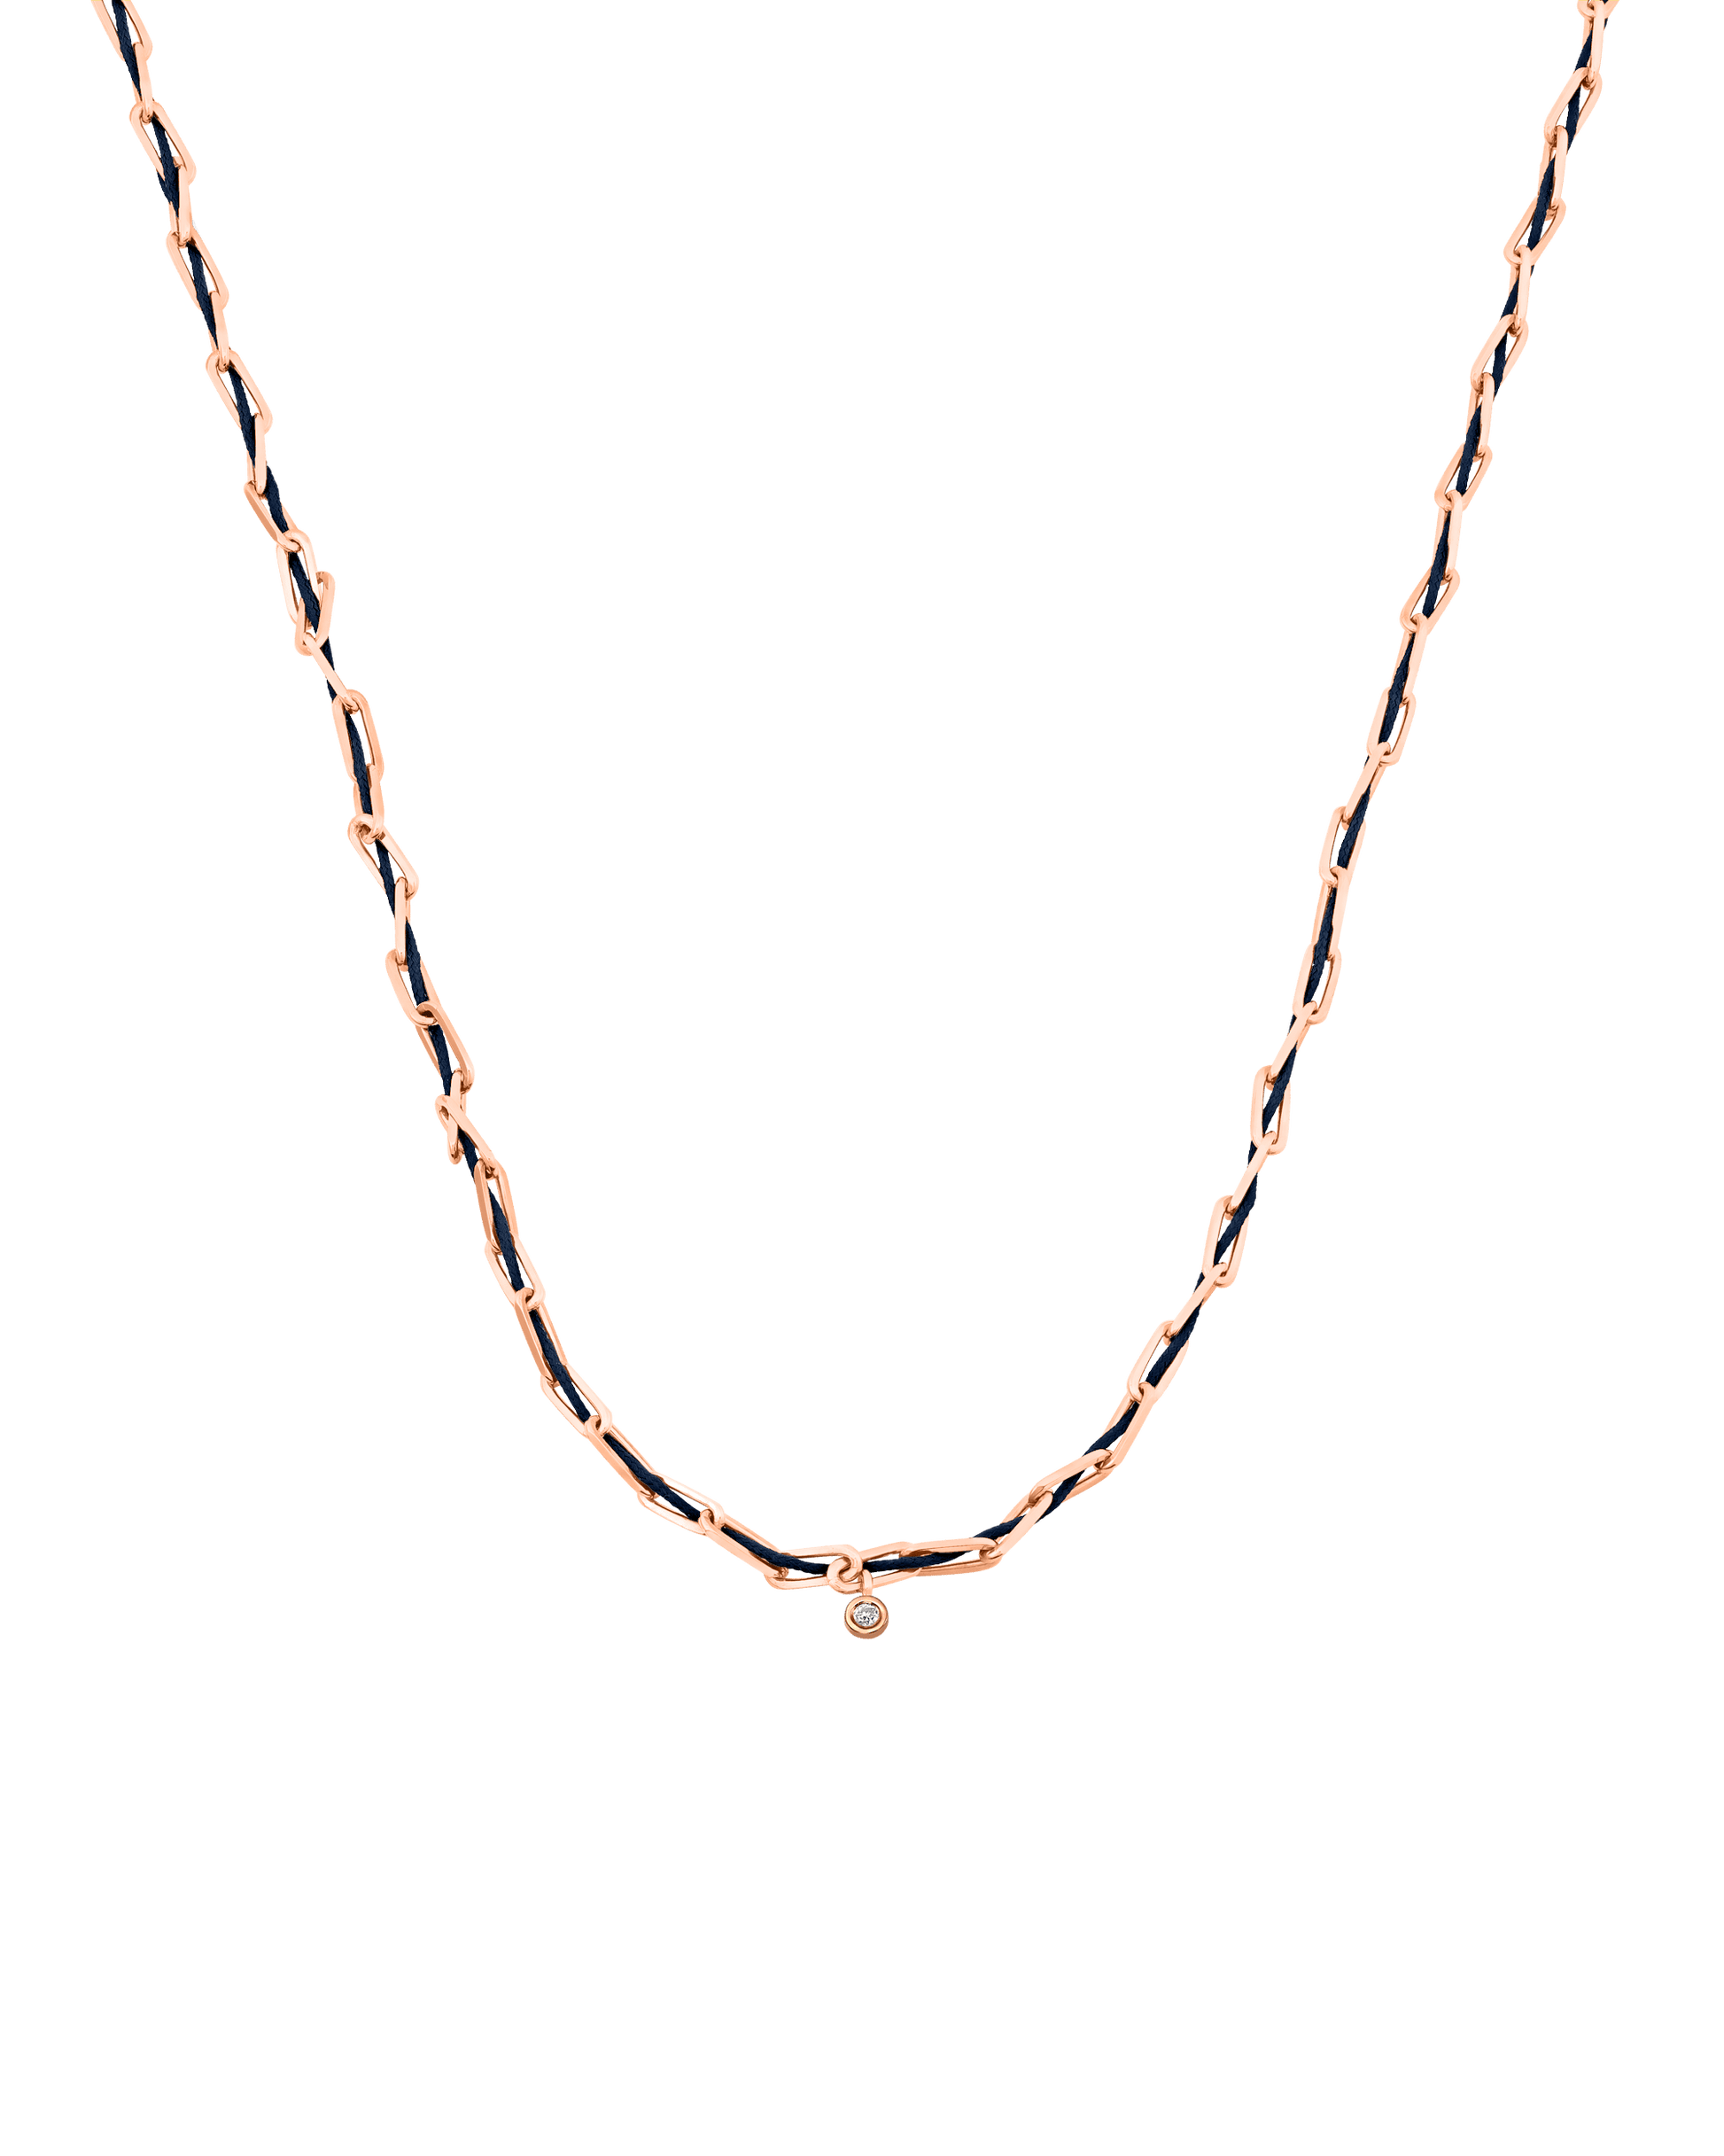 Twine Diamond Necklace - 18K Rose Vermeil Necklaces magal-dev Navy Blue Small: 0.03ct 16"